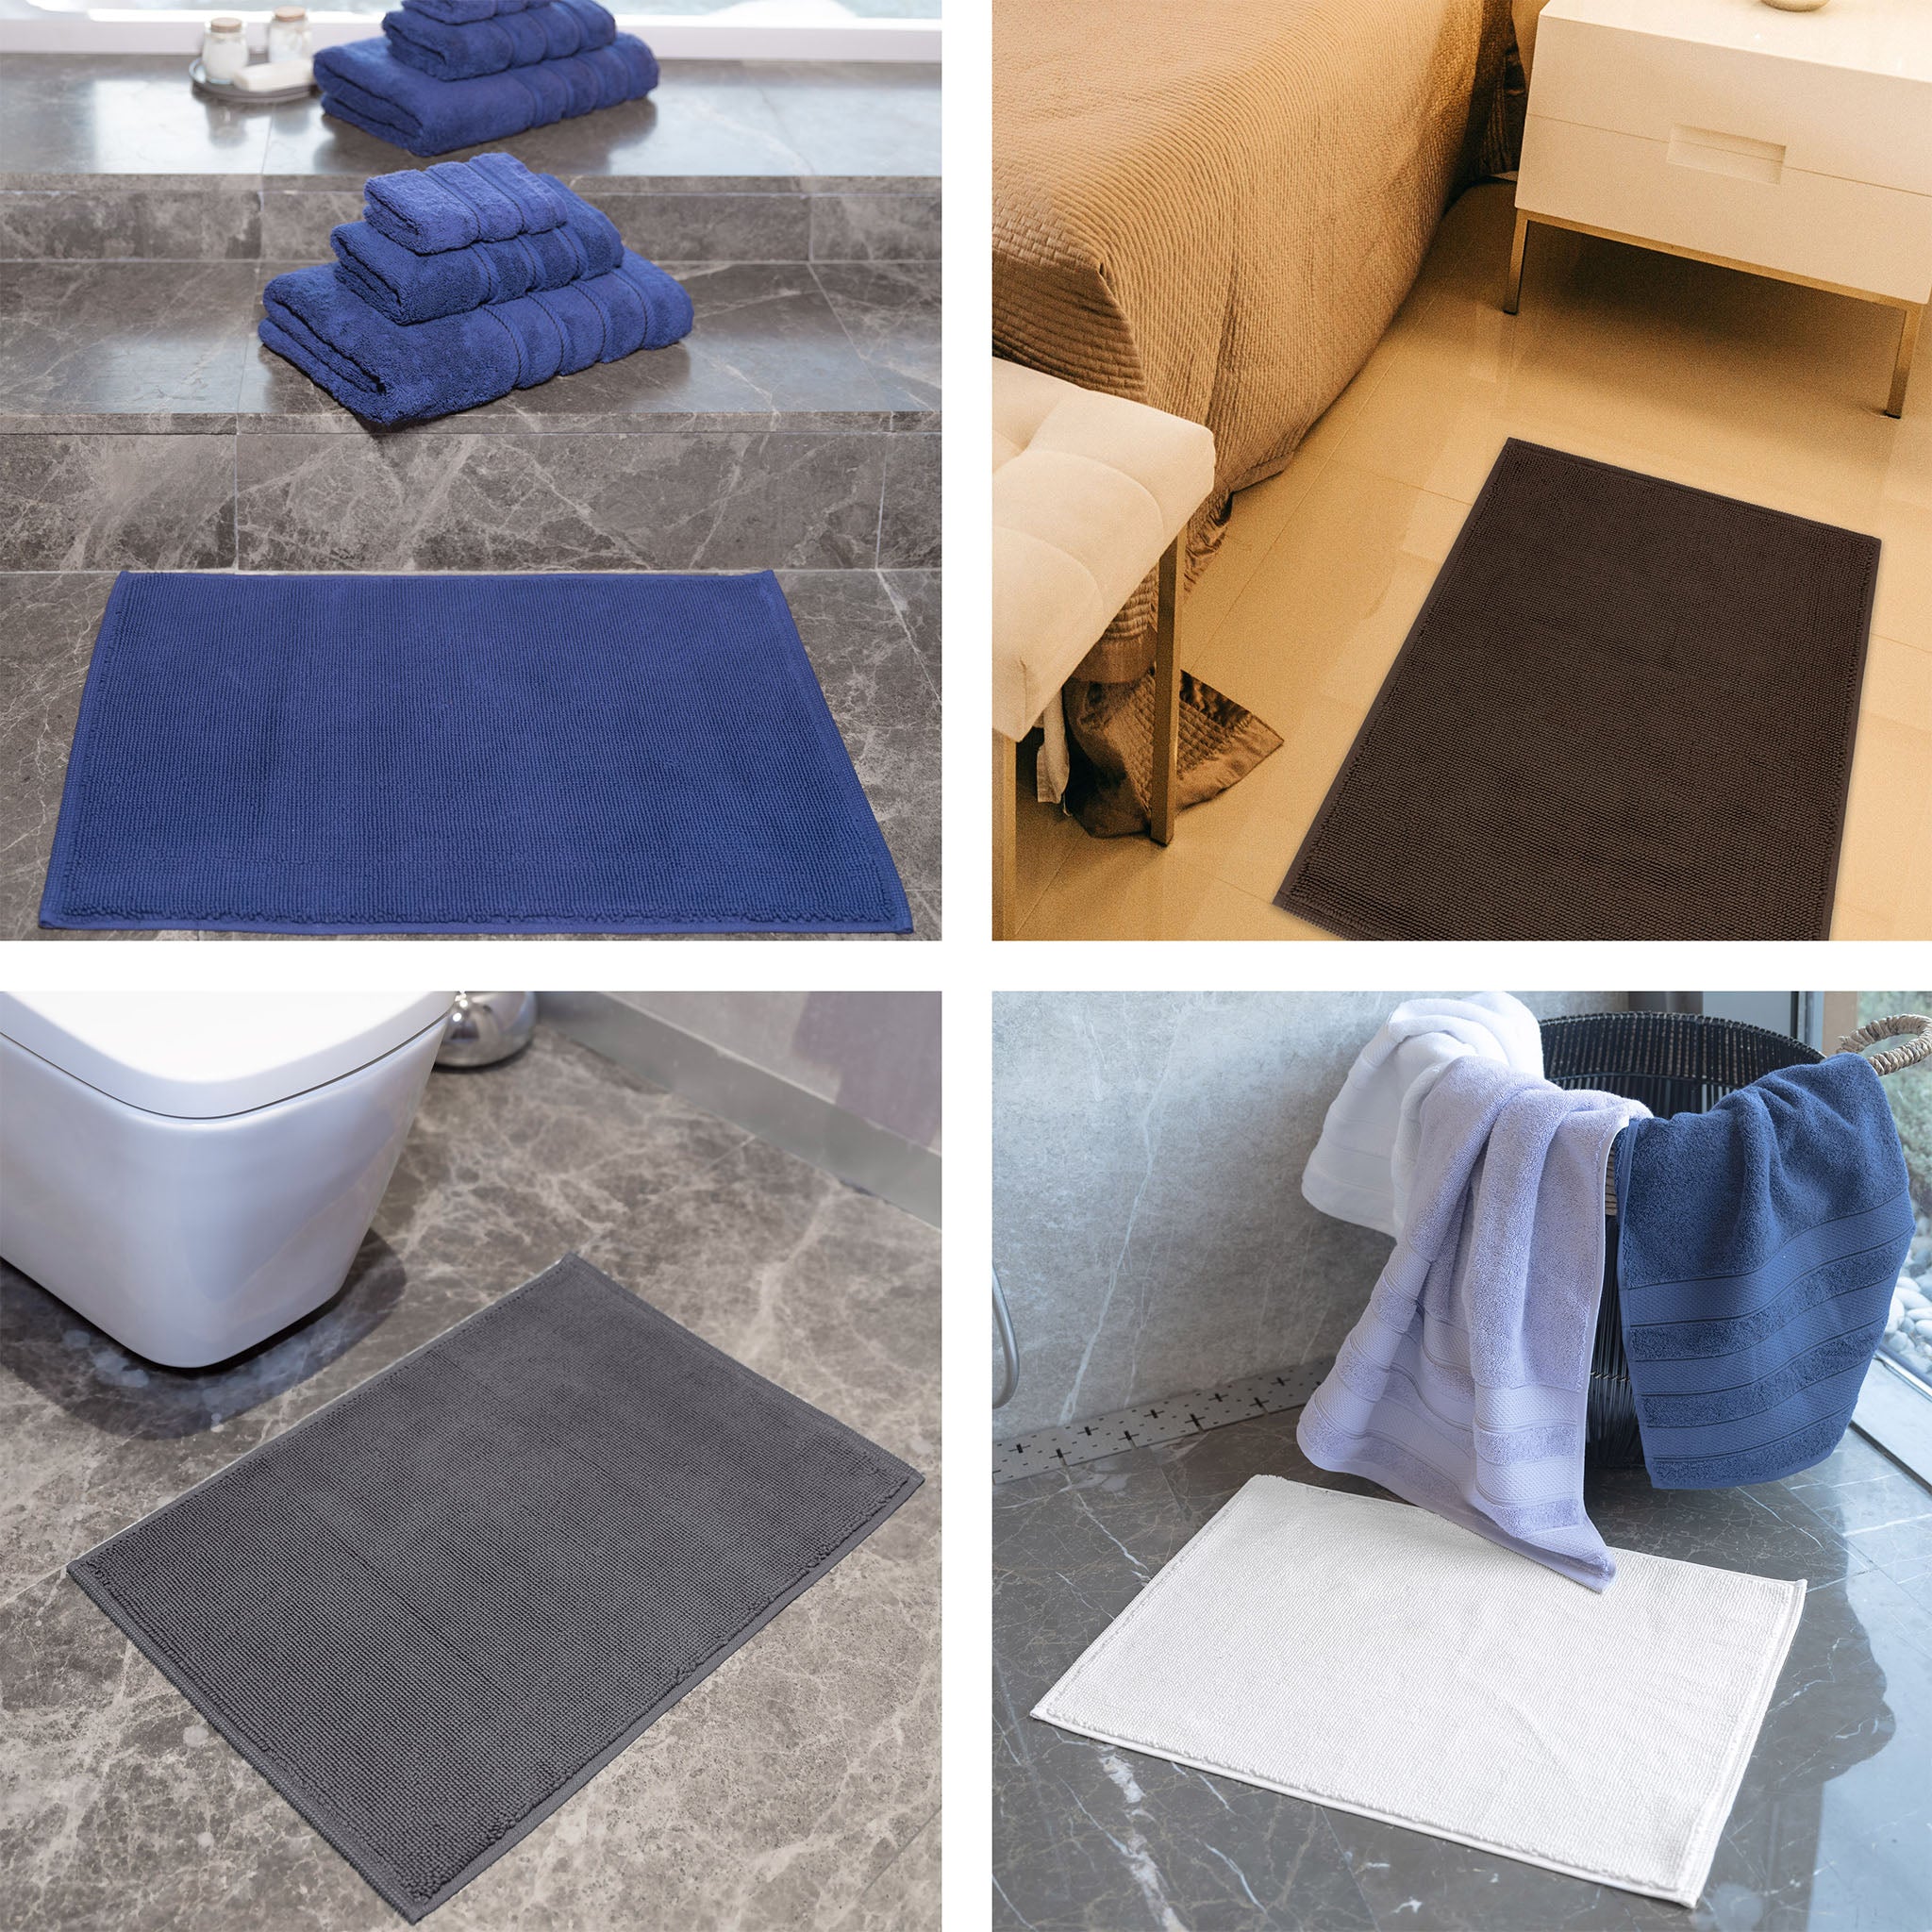 Nestwell™ Ultimate Soft Bath Rug Collection – shopIN.nyc